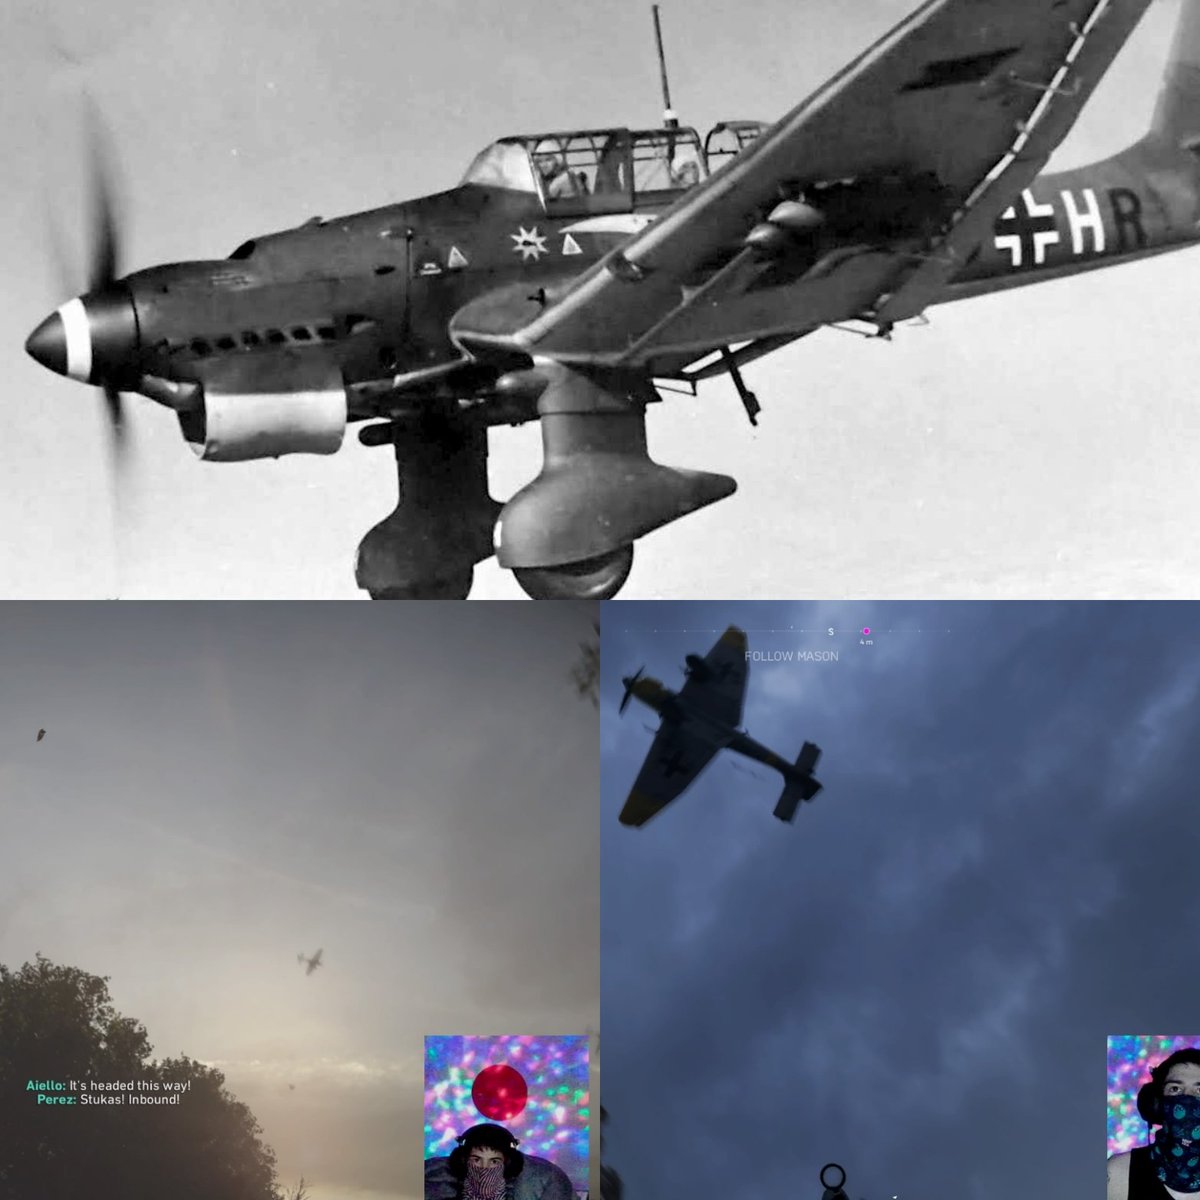 ( ‾́ ◡ ‾́)
Twitch.tv/pokeill
#Duck #stuka #stukasiren #stukasirens #trumpetsofjericho #trumpetofjericho #Battlefield #CallofDuty #scary #scurry #fromabove #above #Sound #freaky #tankbusters #tankdestroyers #pokeill #game #plane #planes #videogame #gamer #gaming #Yikes